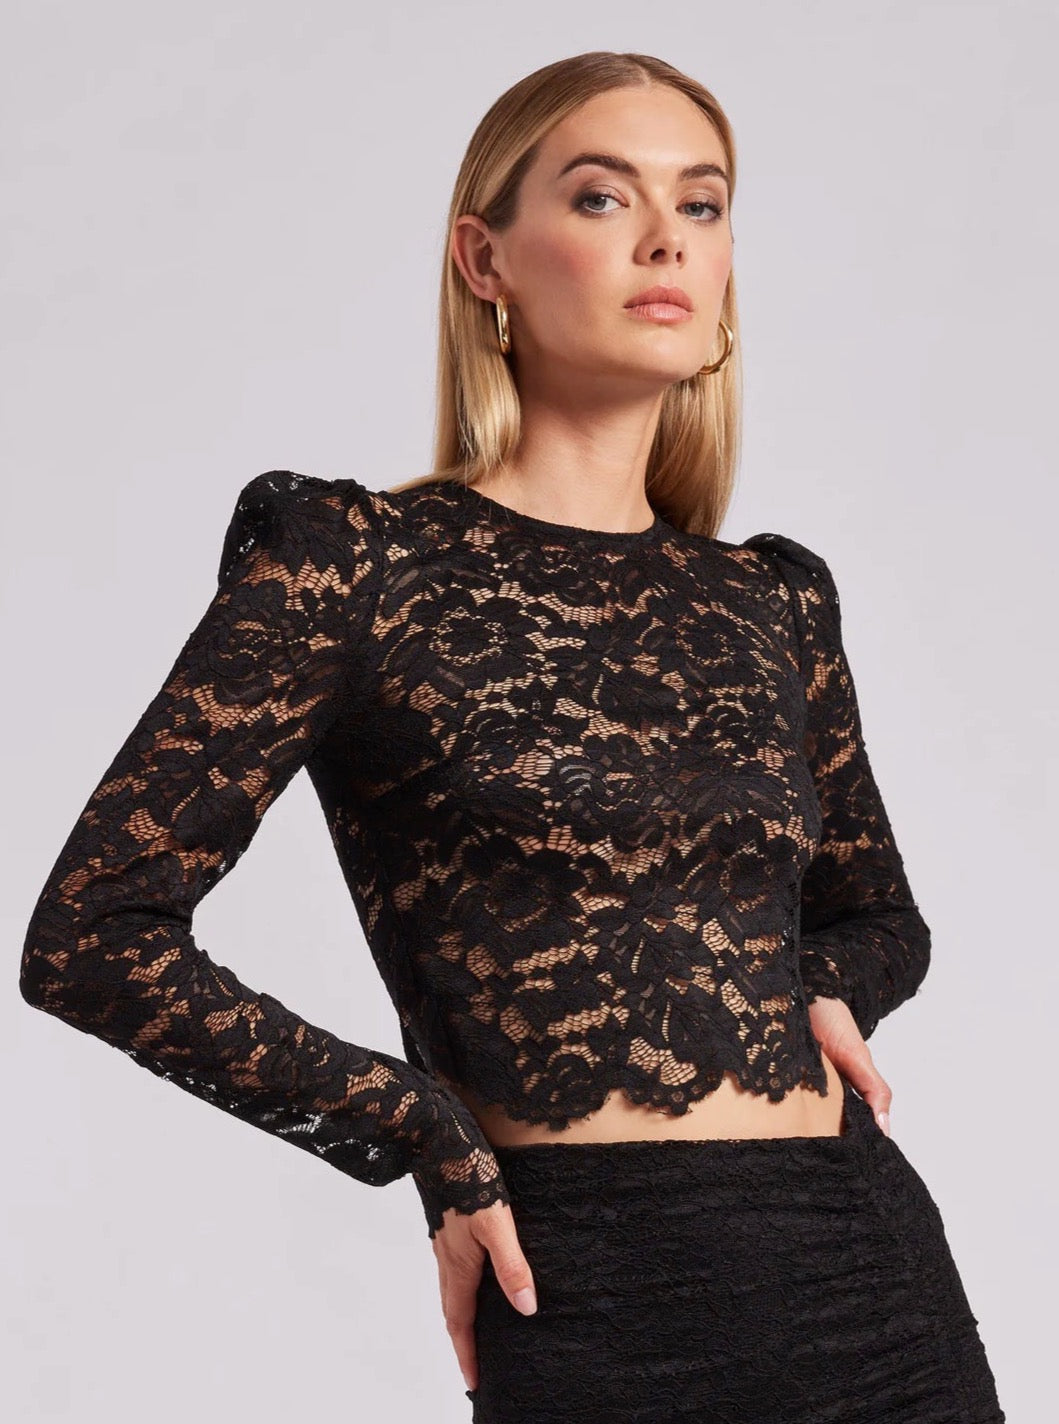 Generation Love Safia Lace Top - Size S Available